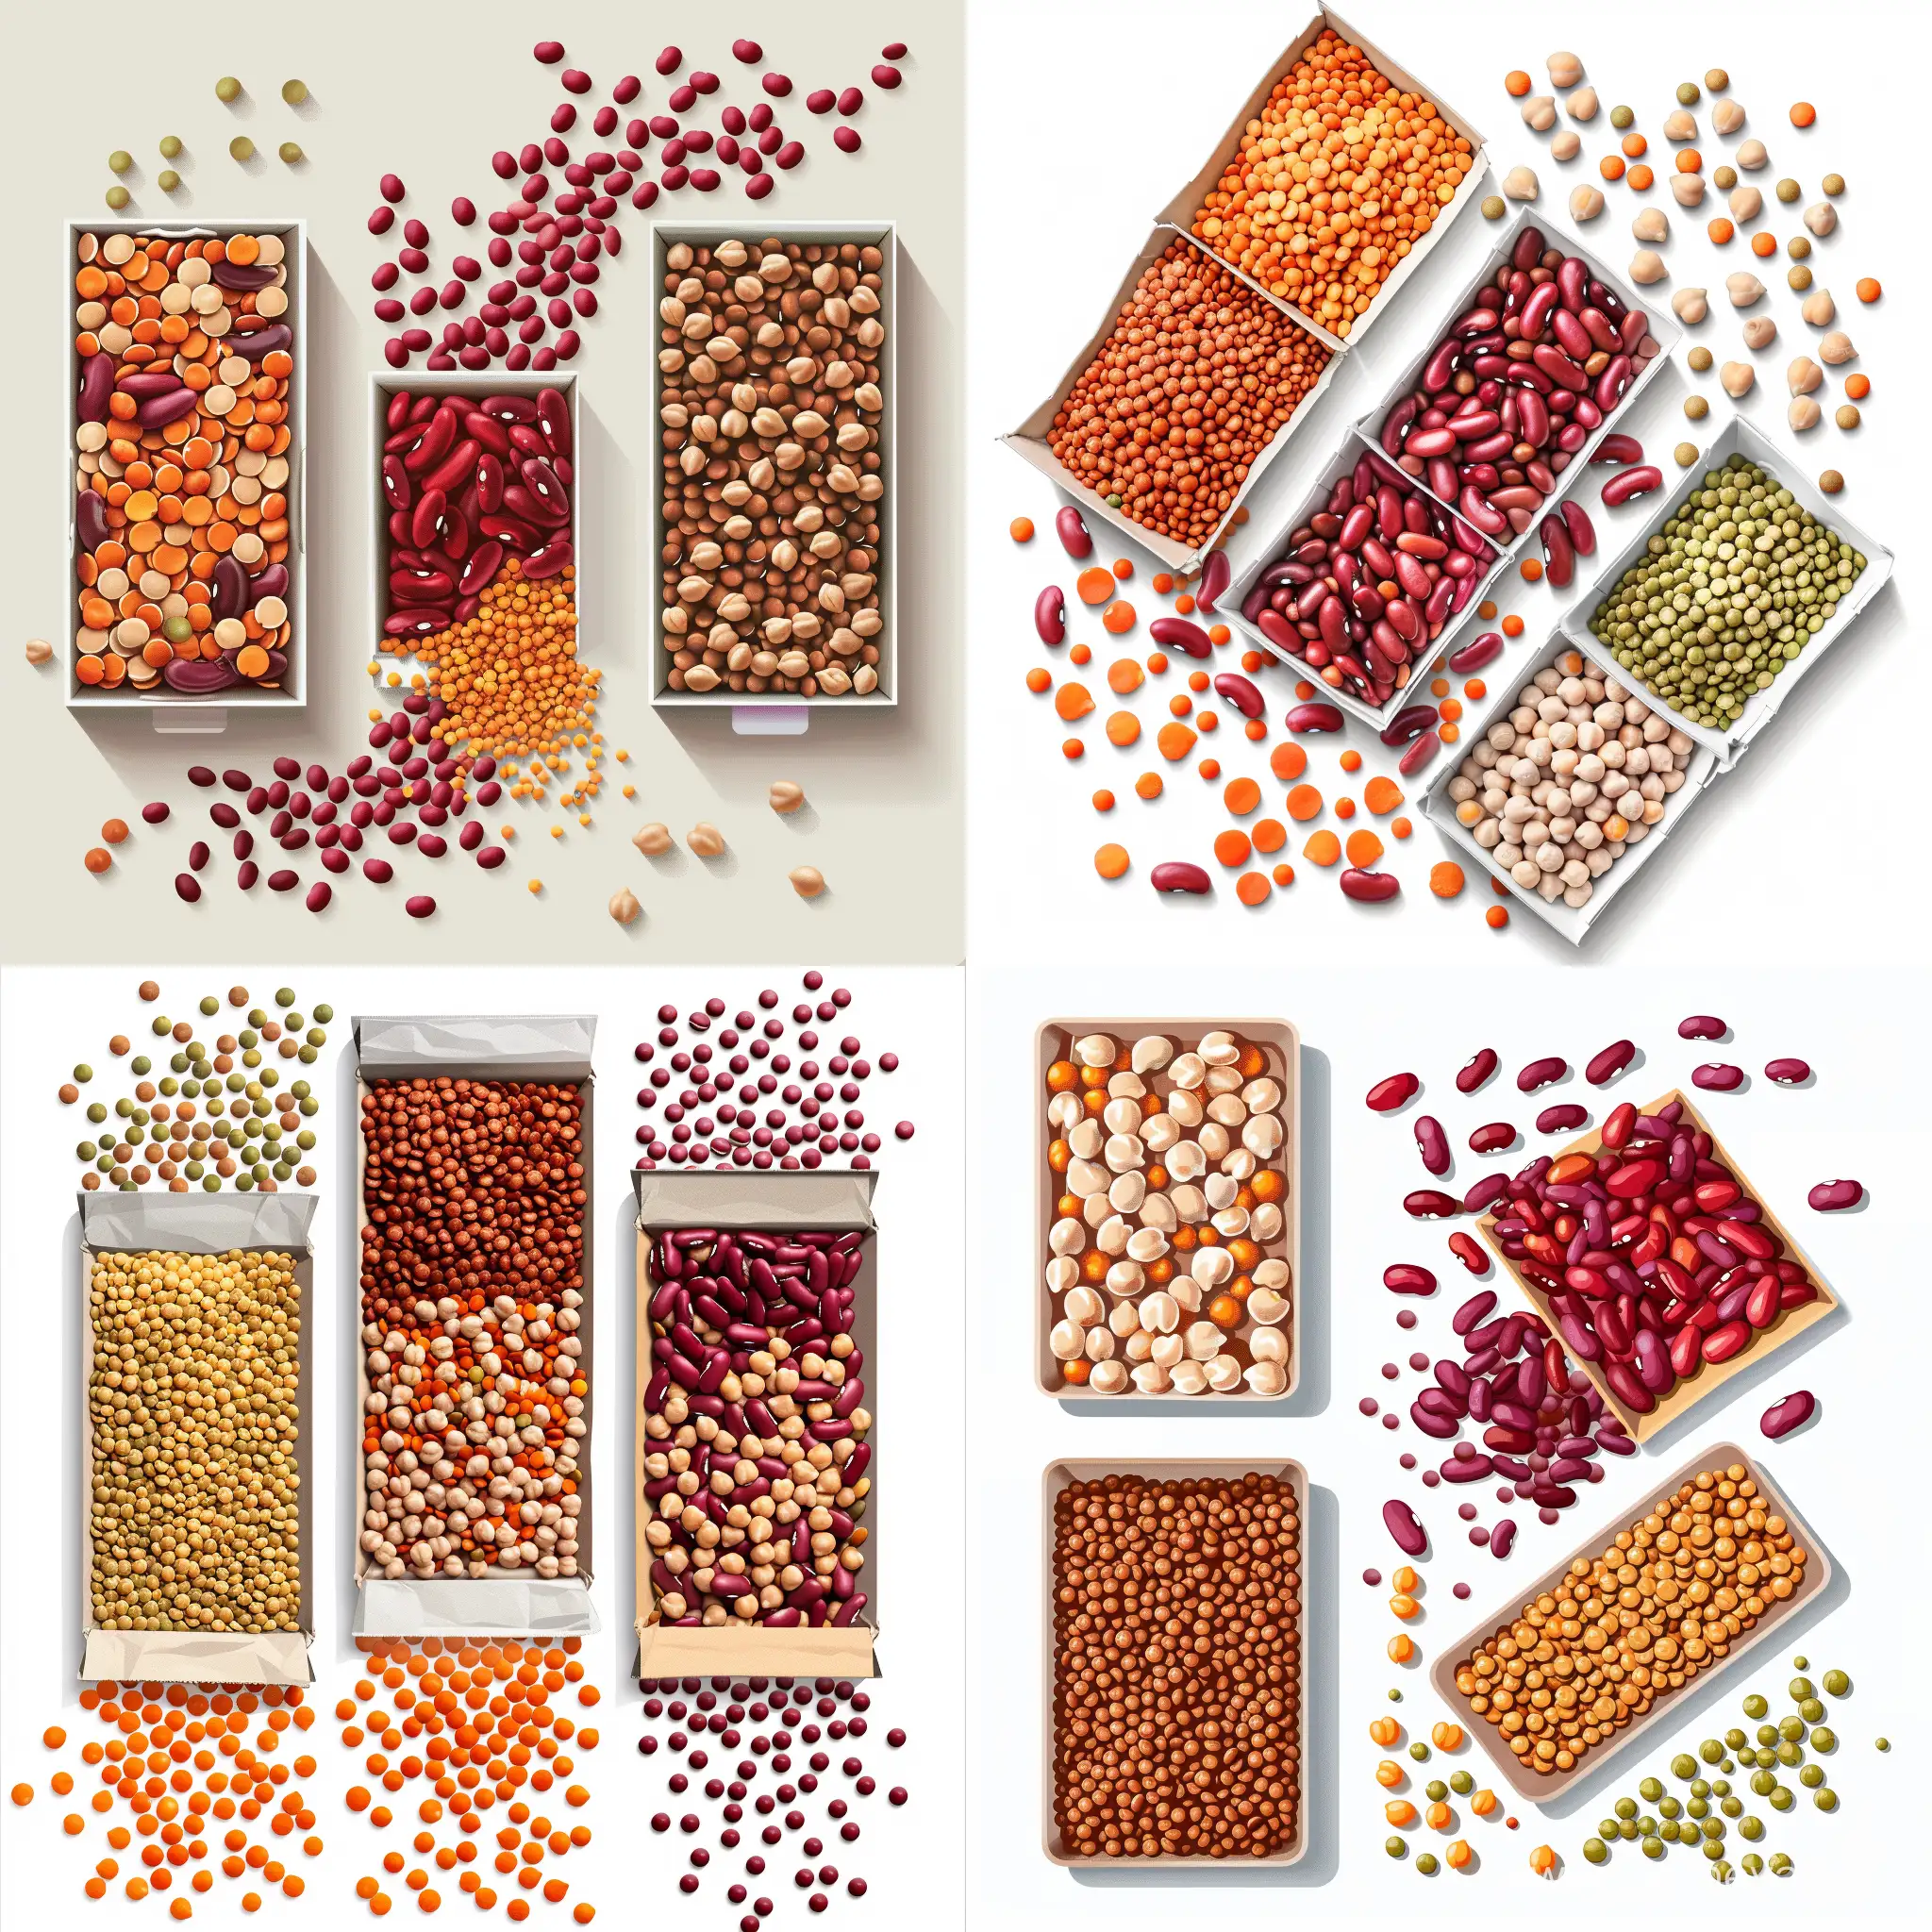 Assorted-Legumes-in-Open-Packaging-Lentils-Red-Beans-Chickpeas